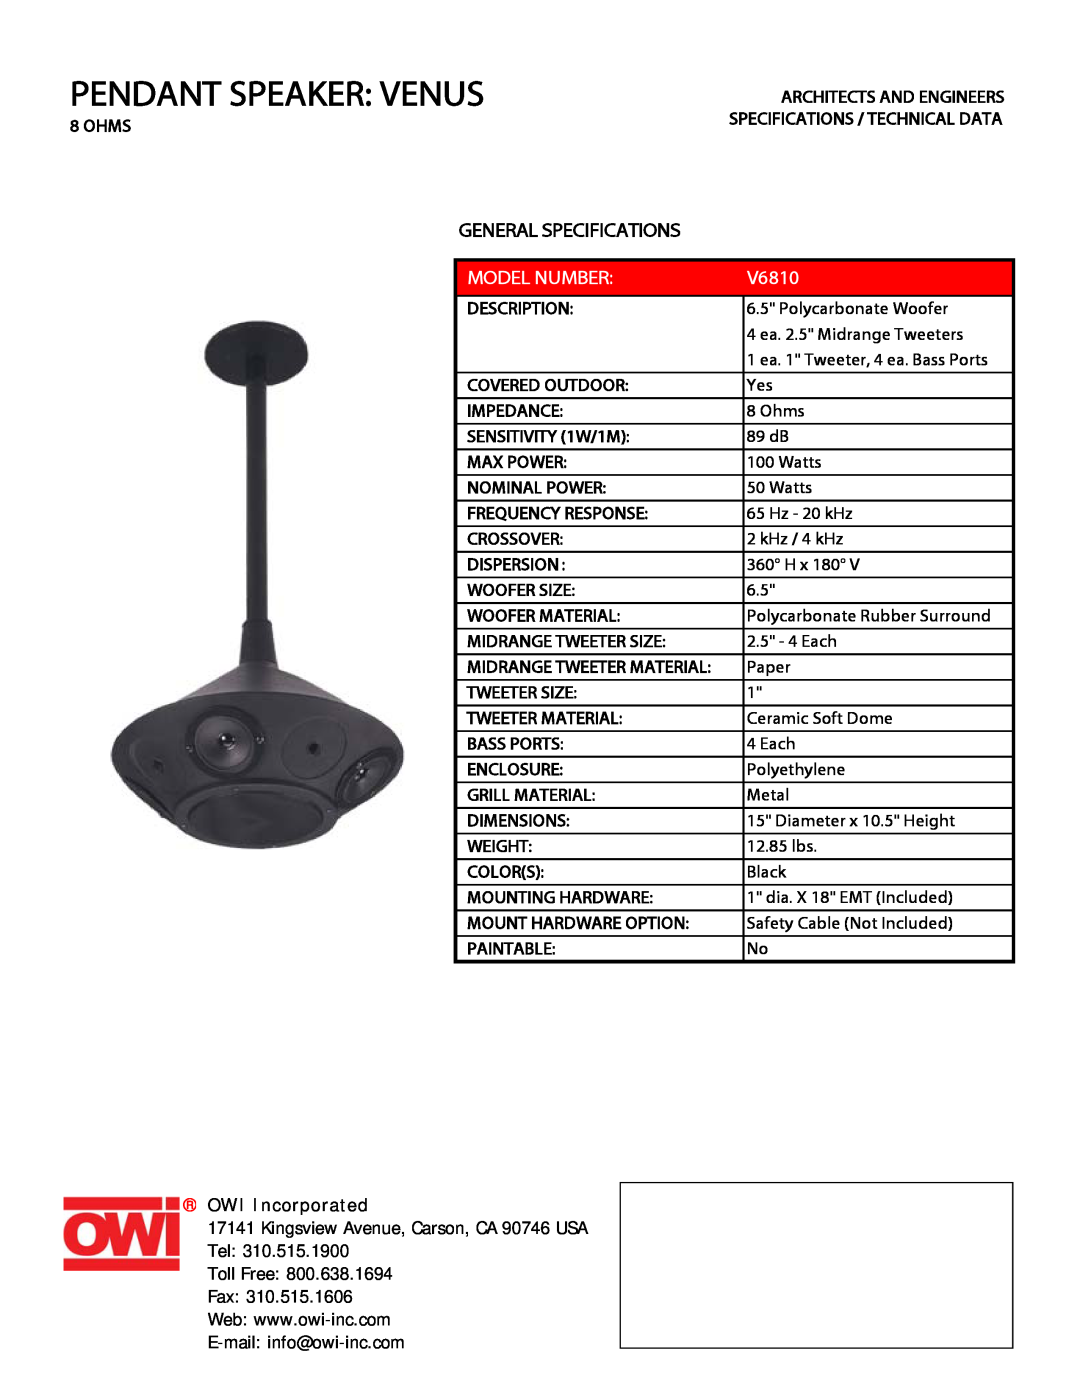 OWI V6810 specifications Pendant Speaker Venus, General Specifications, Model Number, OWI Incorporated 